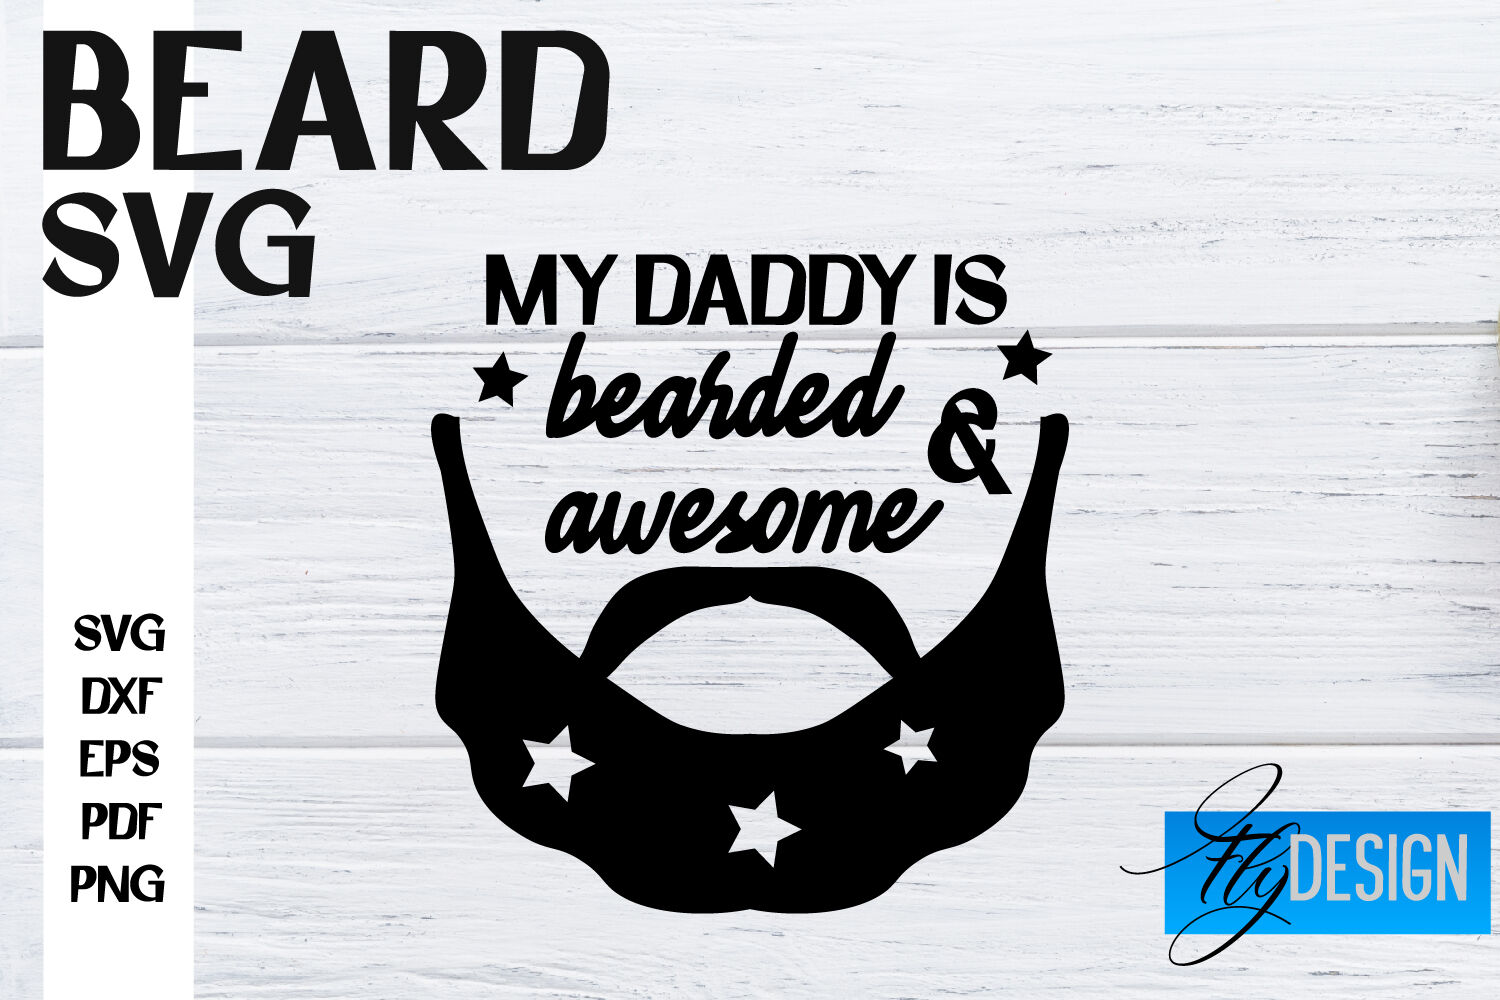 Beard SVG Design | Funny Quotes SVG Design | Bearded Men SVG By Fly Design  | TheHungryJPEG